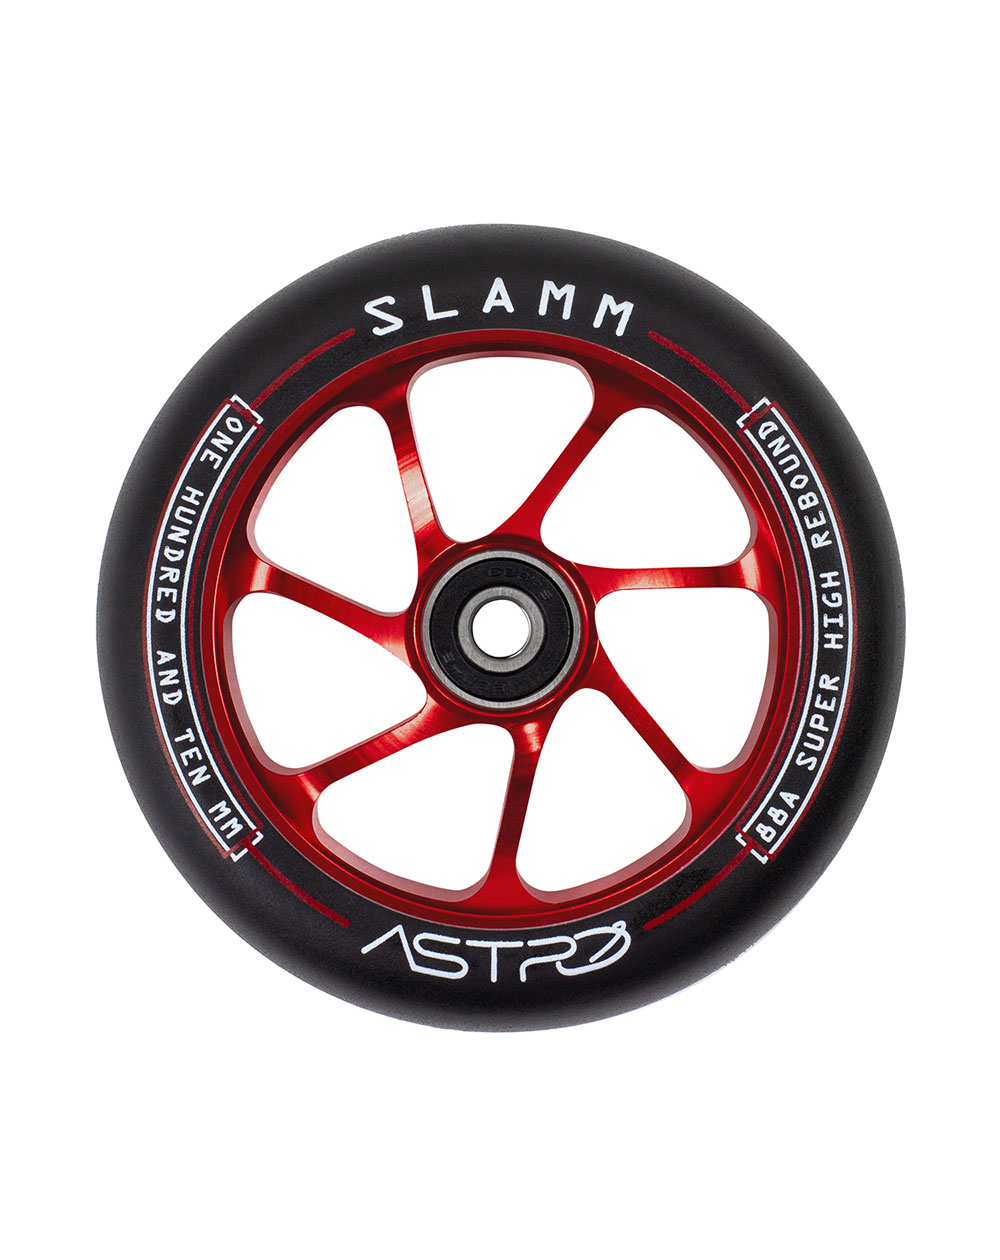 Slamm Scooters Astro 110mm Scooter Rad Red